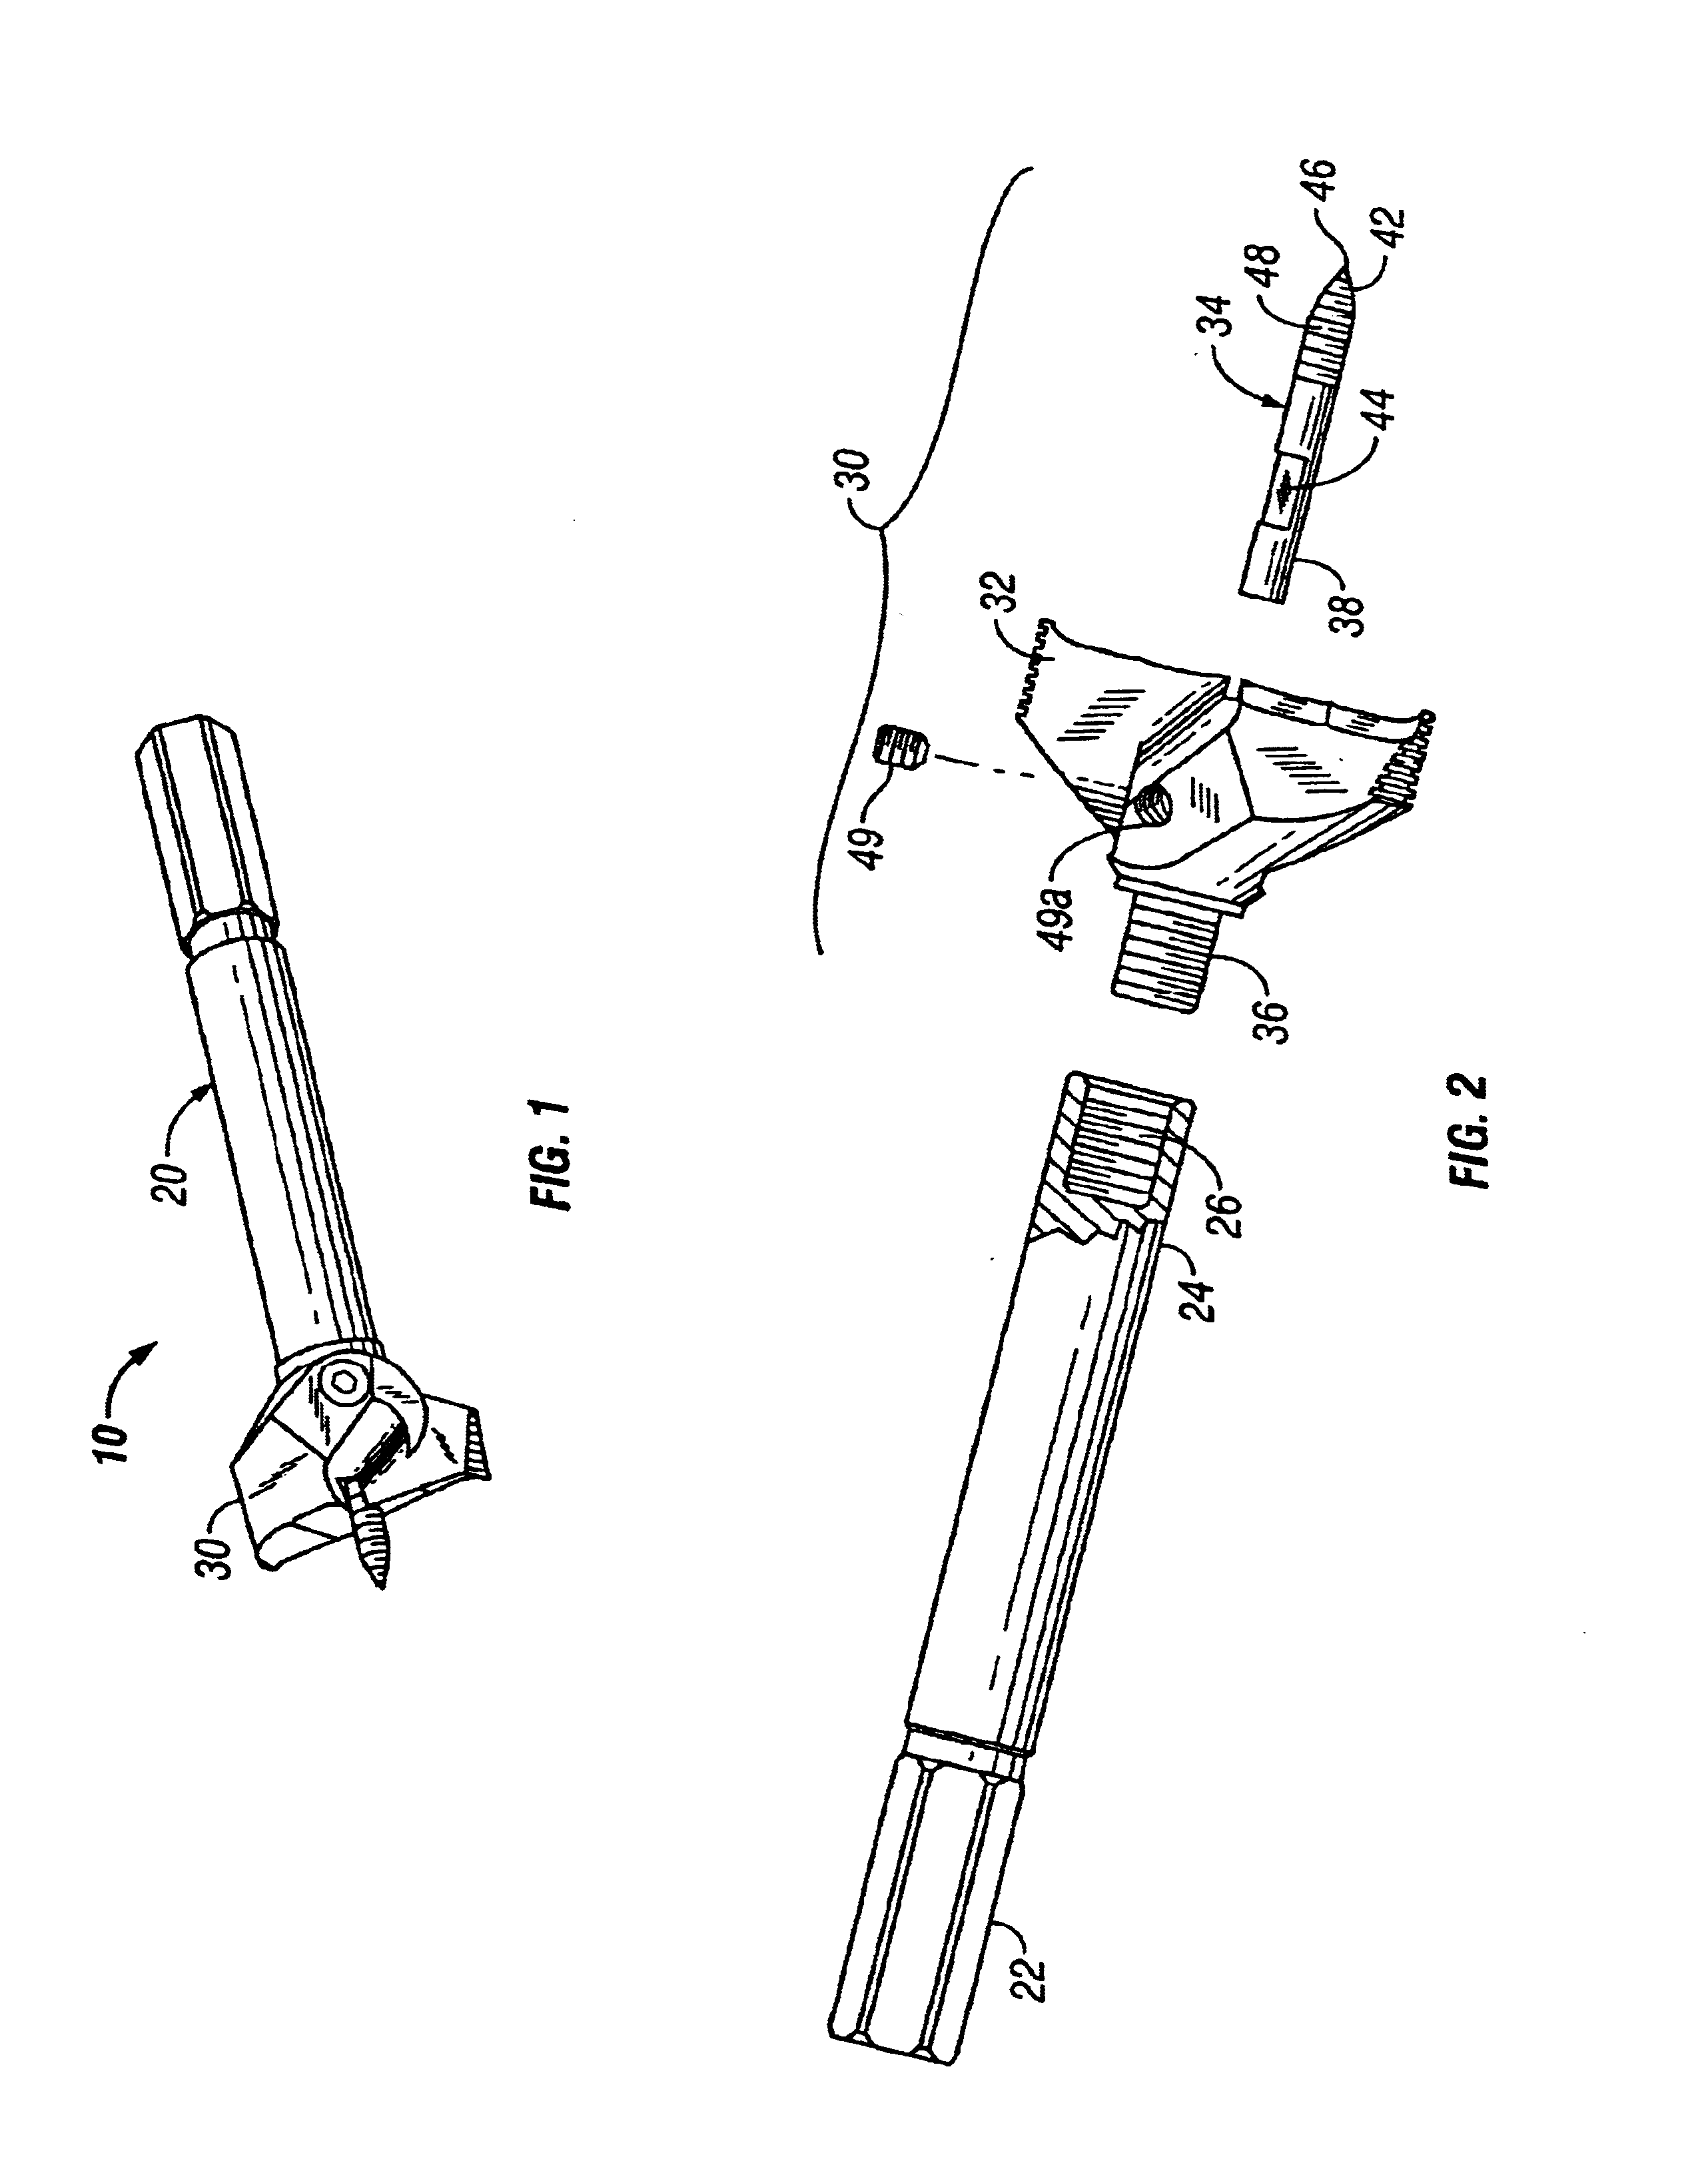 Drill bit apparatus and method of manufacture of same